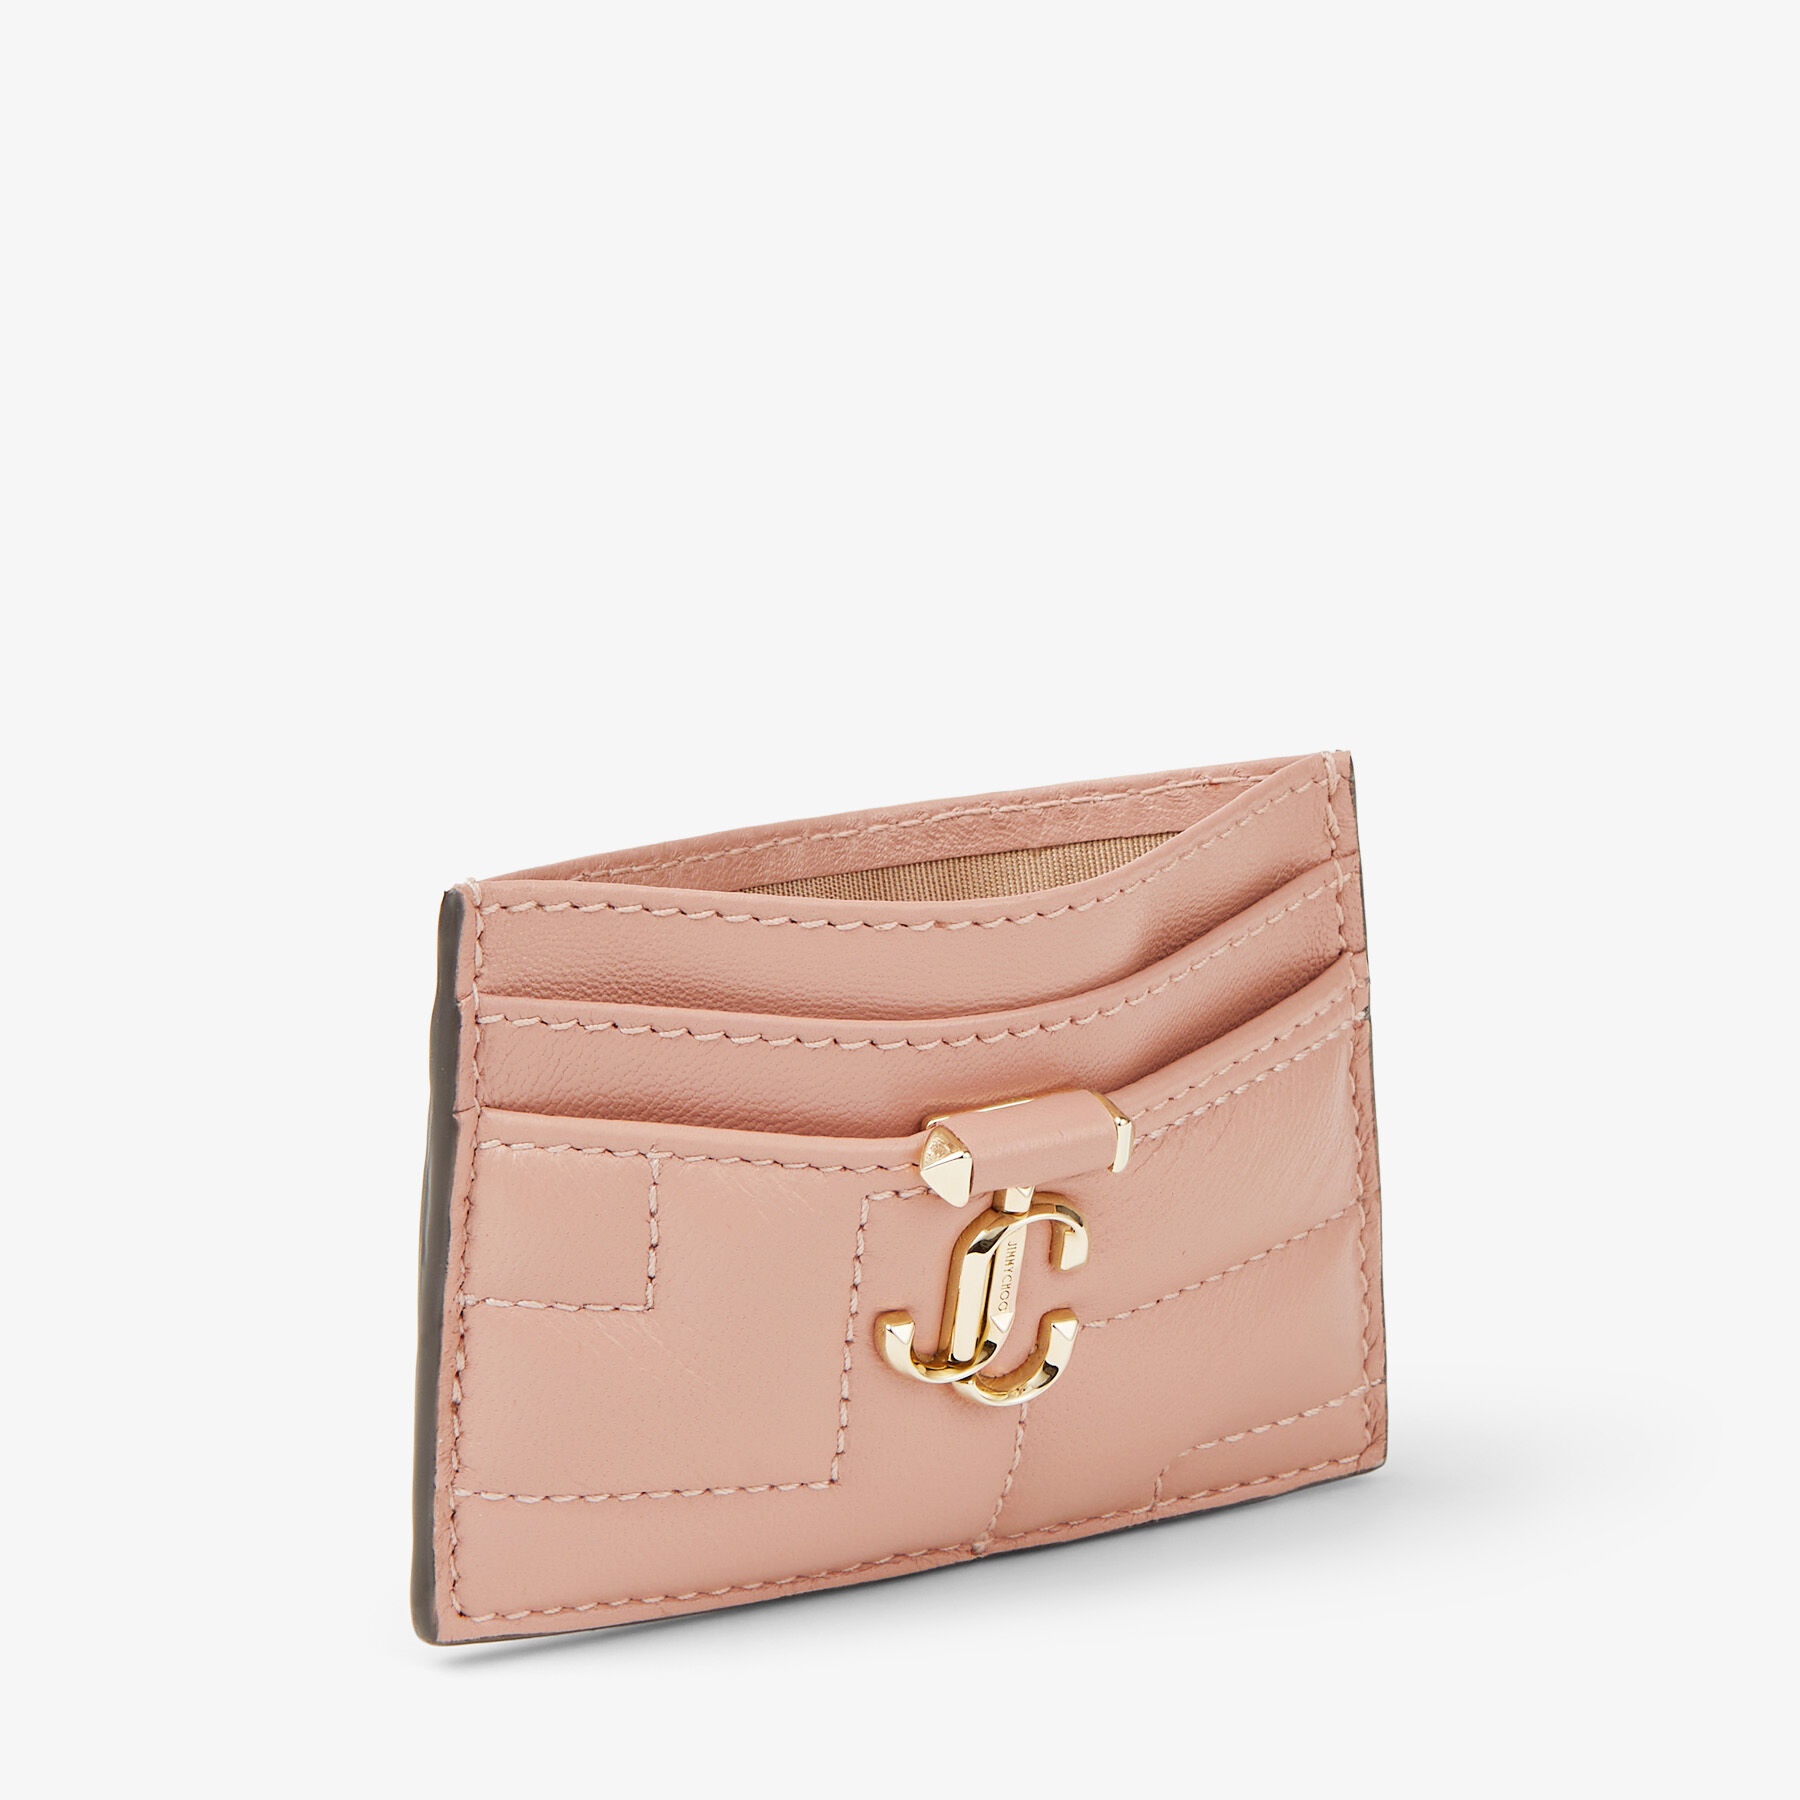 Umika Avenue
Ballet Pink Quilted Nappa Leather Card Holder with JC Emblem - 3